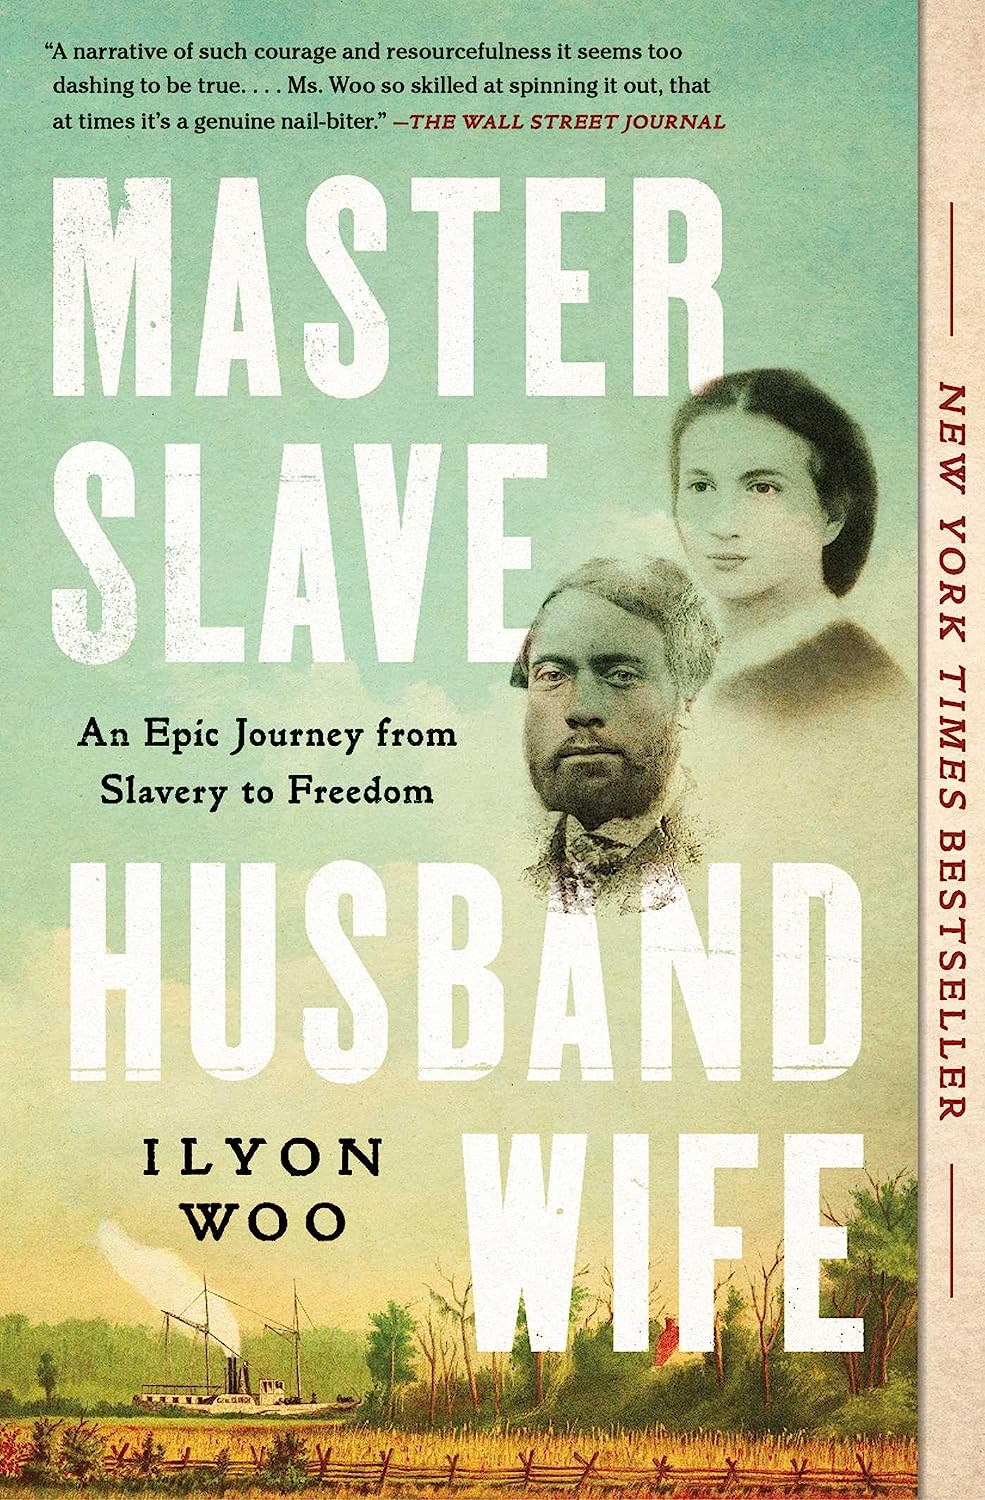 Master Slave Husband Wife // An Epic Journey from Slavery to Freedom